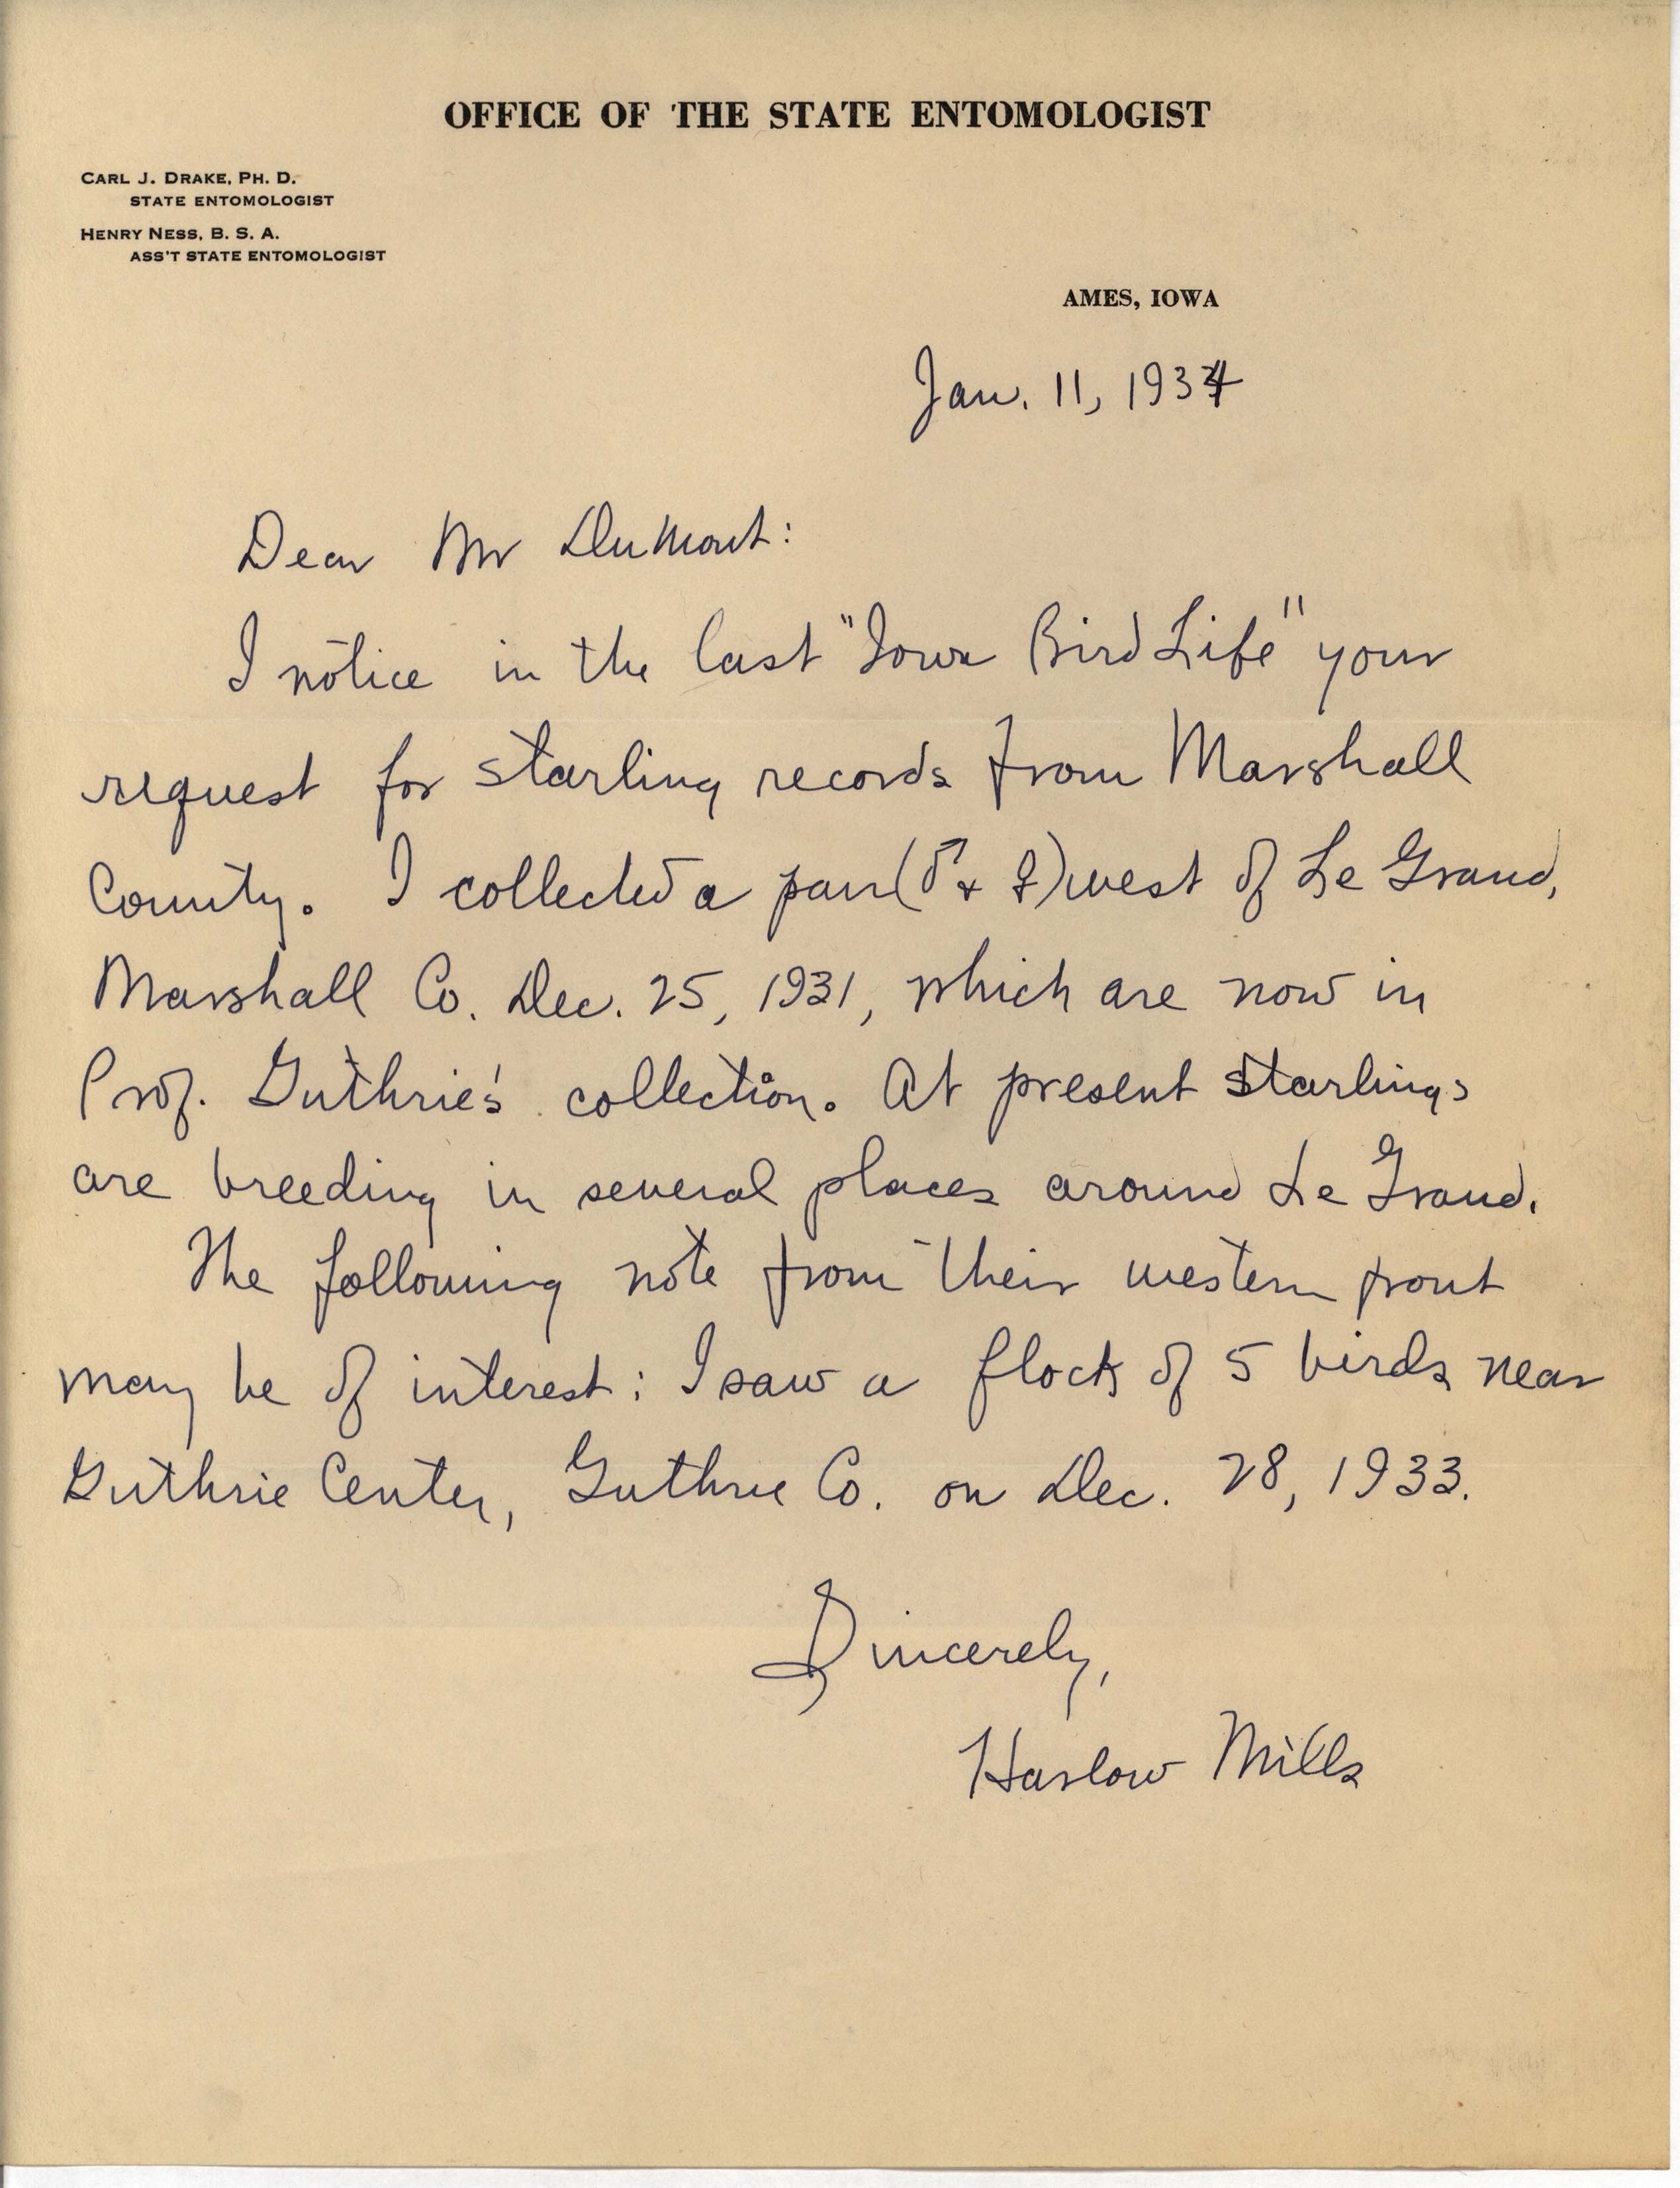 Harlow Mills letter to Philip DuMont regarding Starlings in Marshall County, January 11, 1934